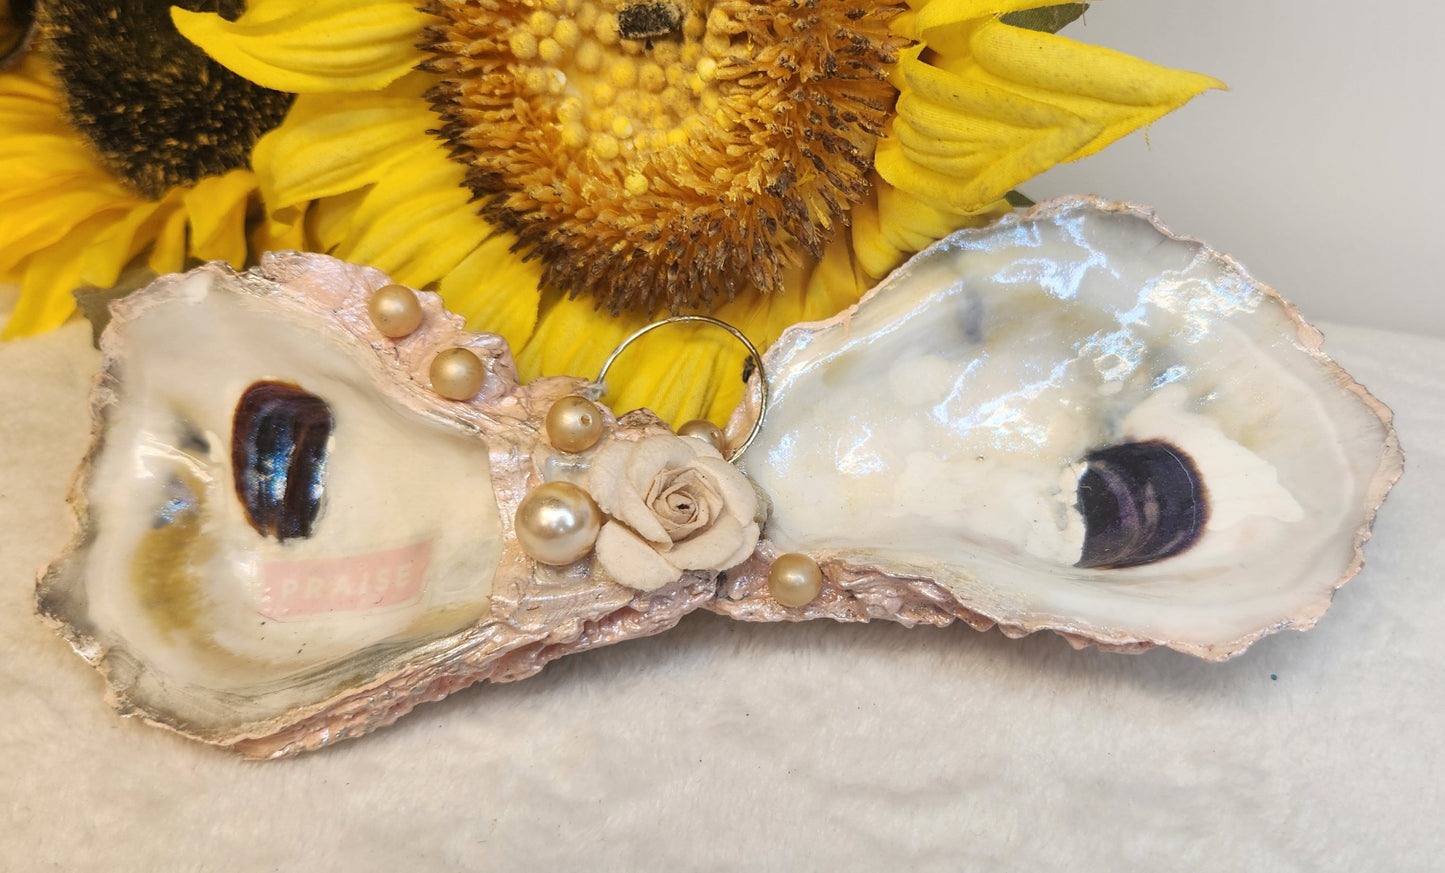 Angel Wing Oyster Shells (AW)